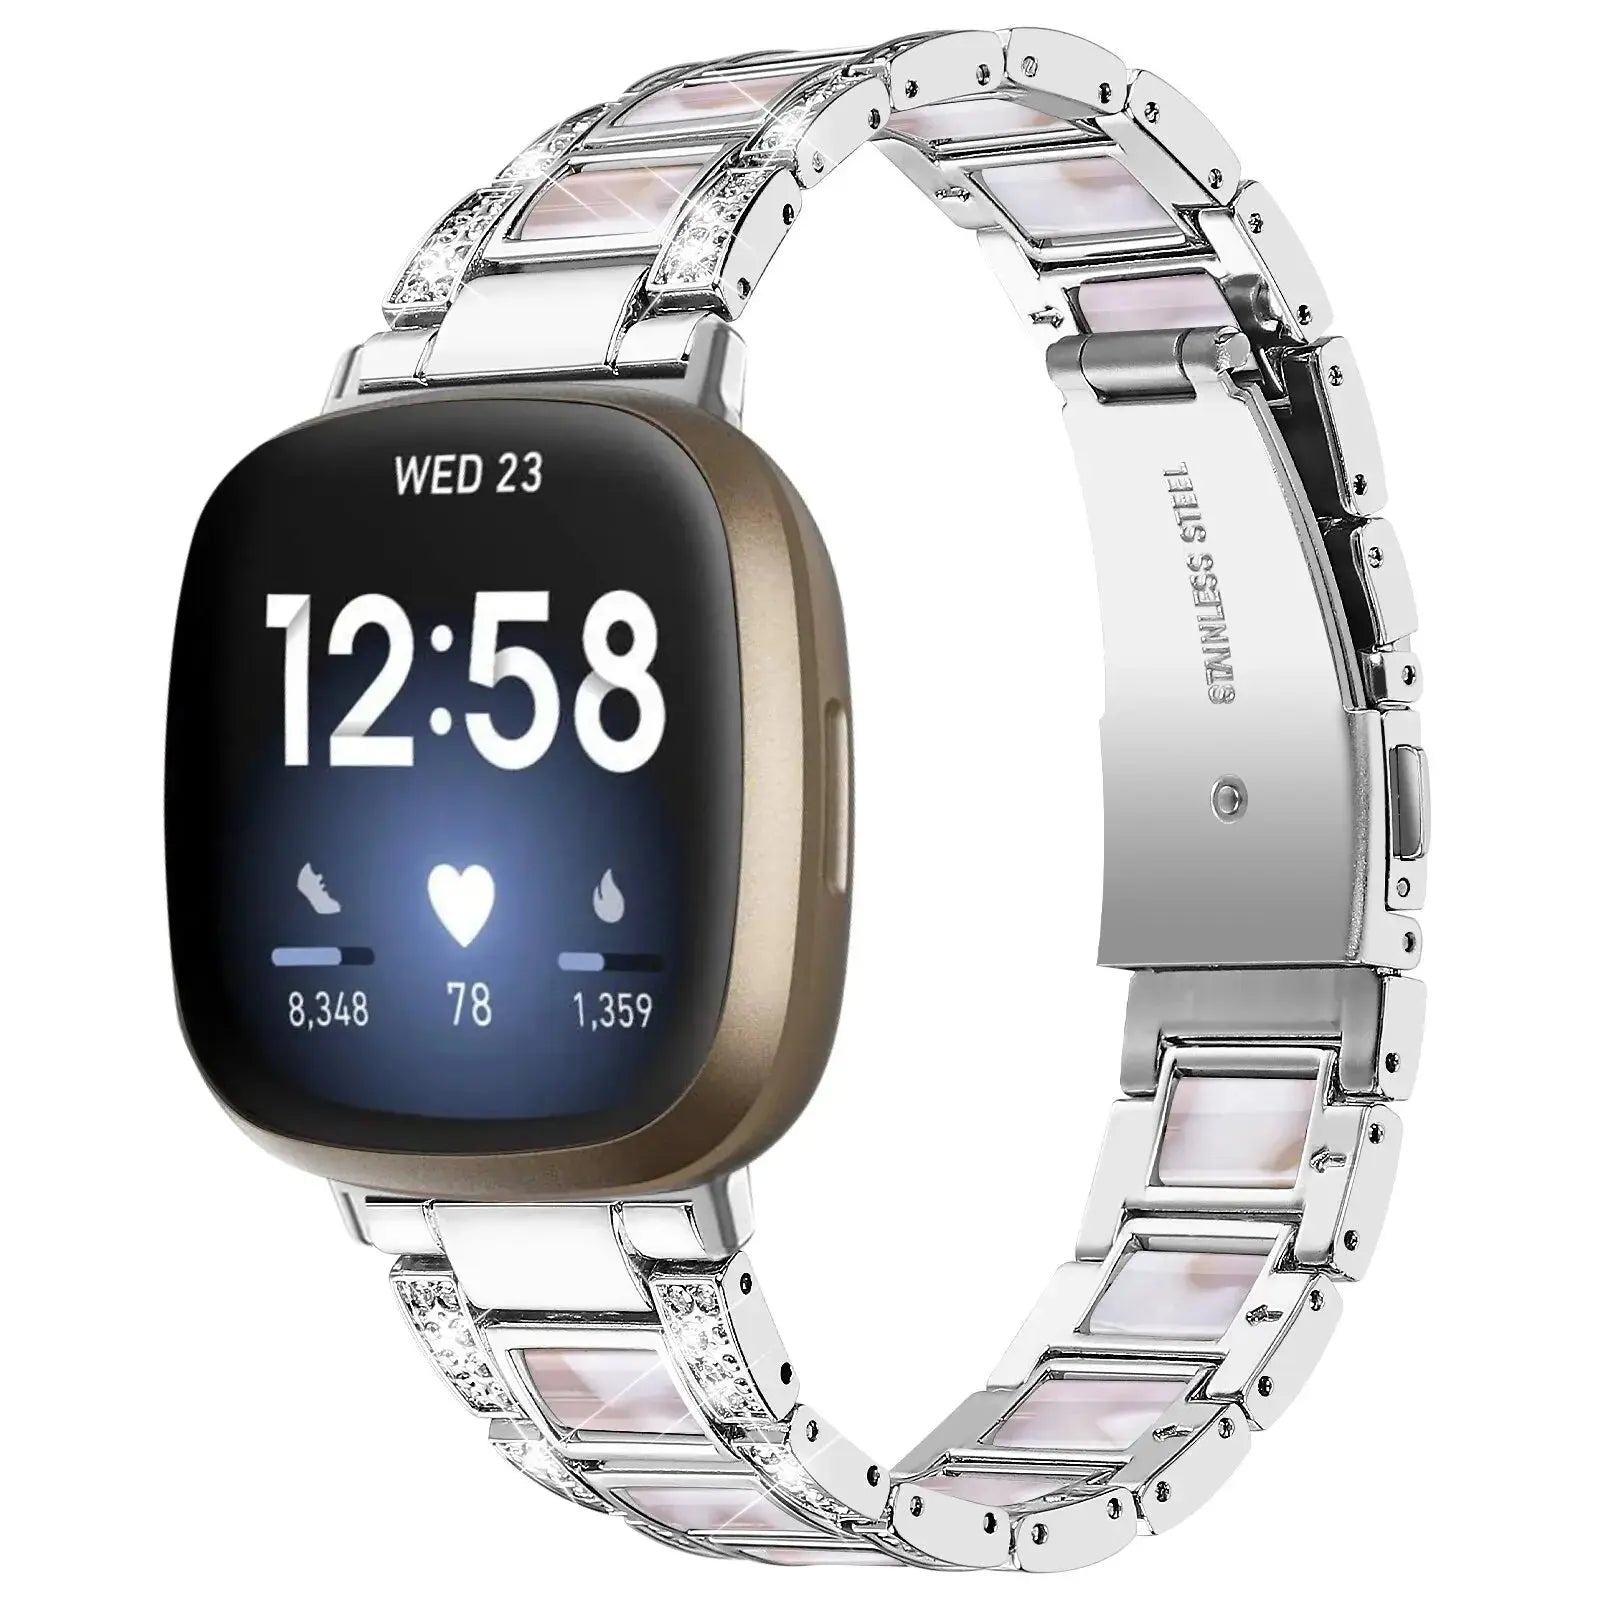 DiamondFlex Stainless Steel Band for Fitbit Versa 3/4 and Sense 1/2 - Pinnacle Luxuries